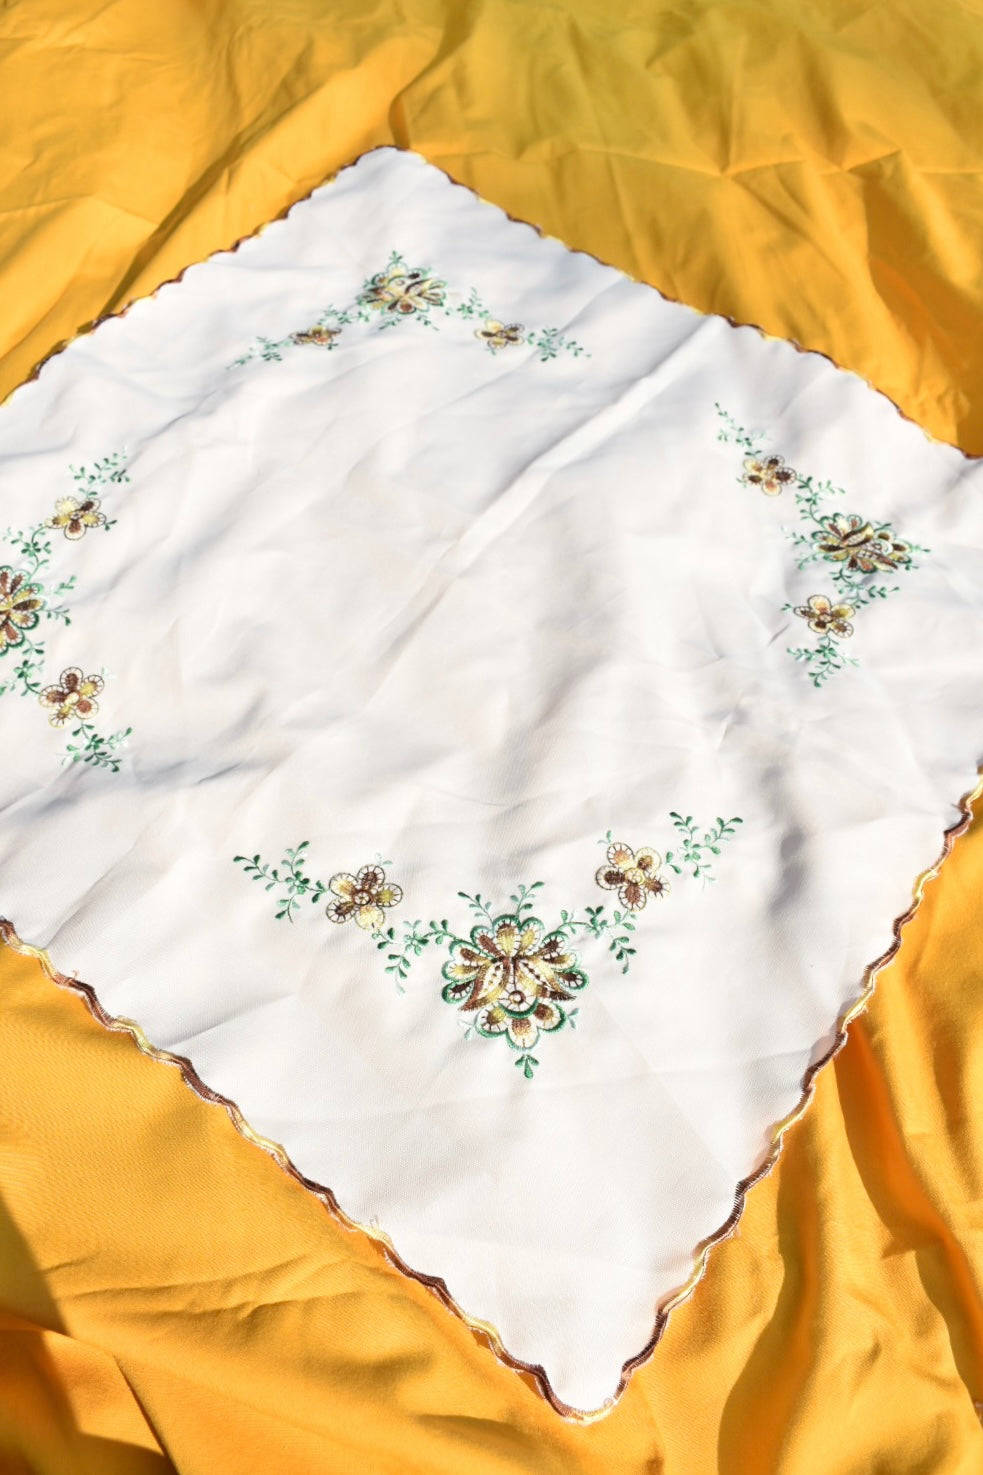 Handmade embroidery, table cloth by Naveedw2 | Fiverr